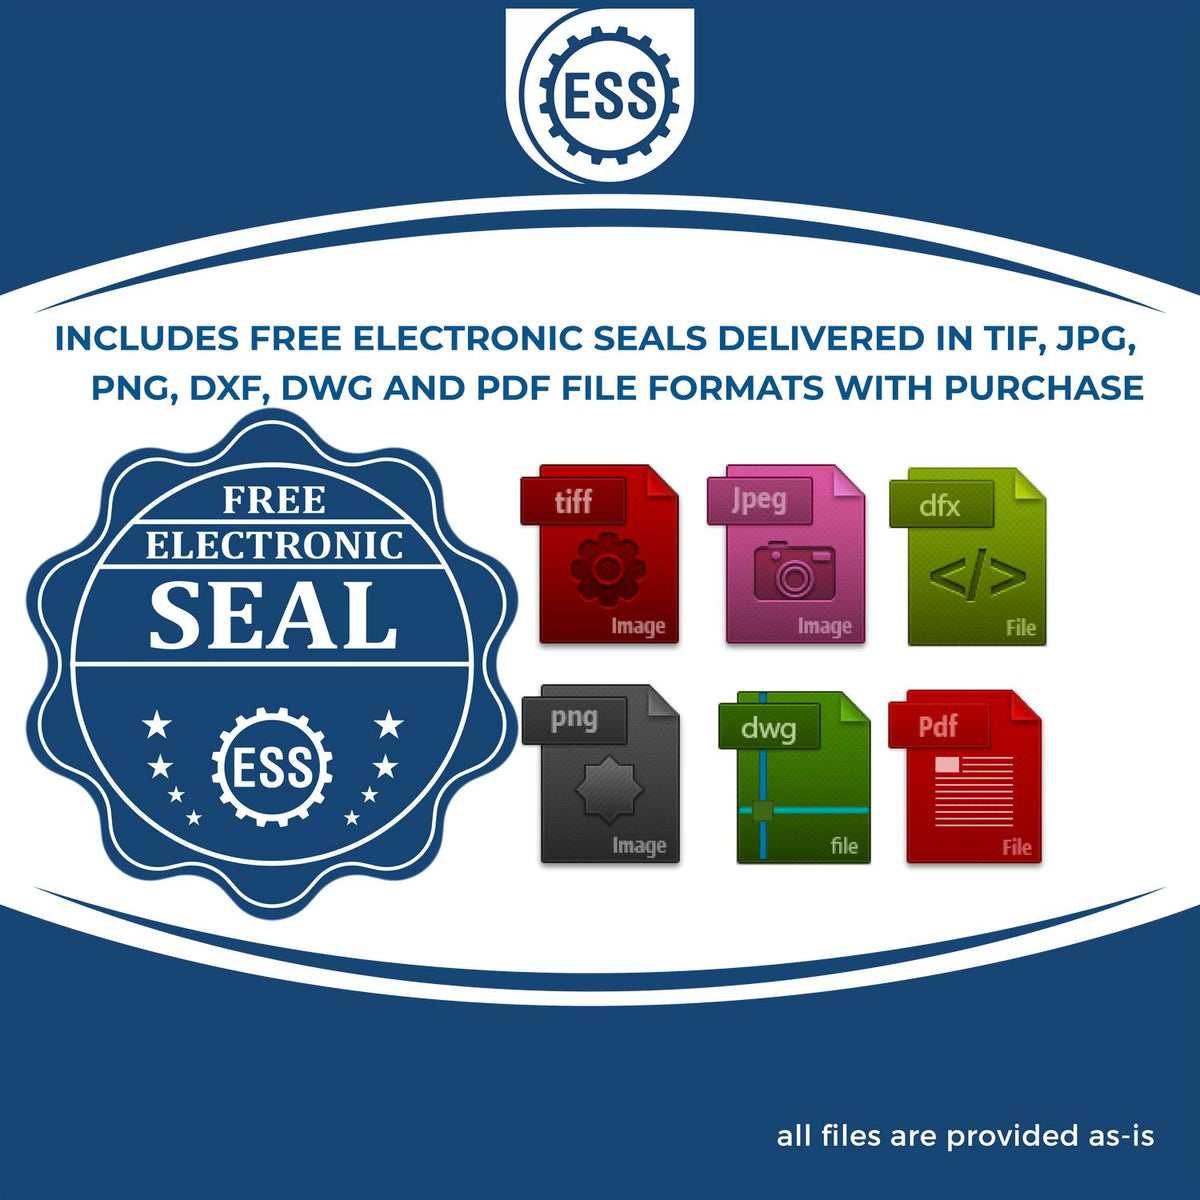 An infographic for the free electronic seal for the MaxLight Premium Pre-Inked Idaho Rectangular Notarial Stamp illustrating the different file type icons such as DXF, DWG, TIF, JPG and PNG.